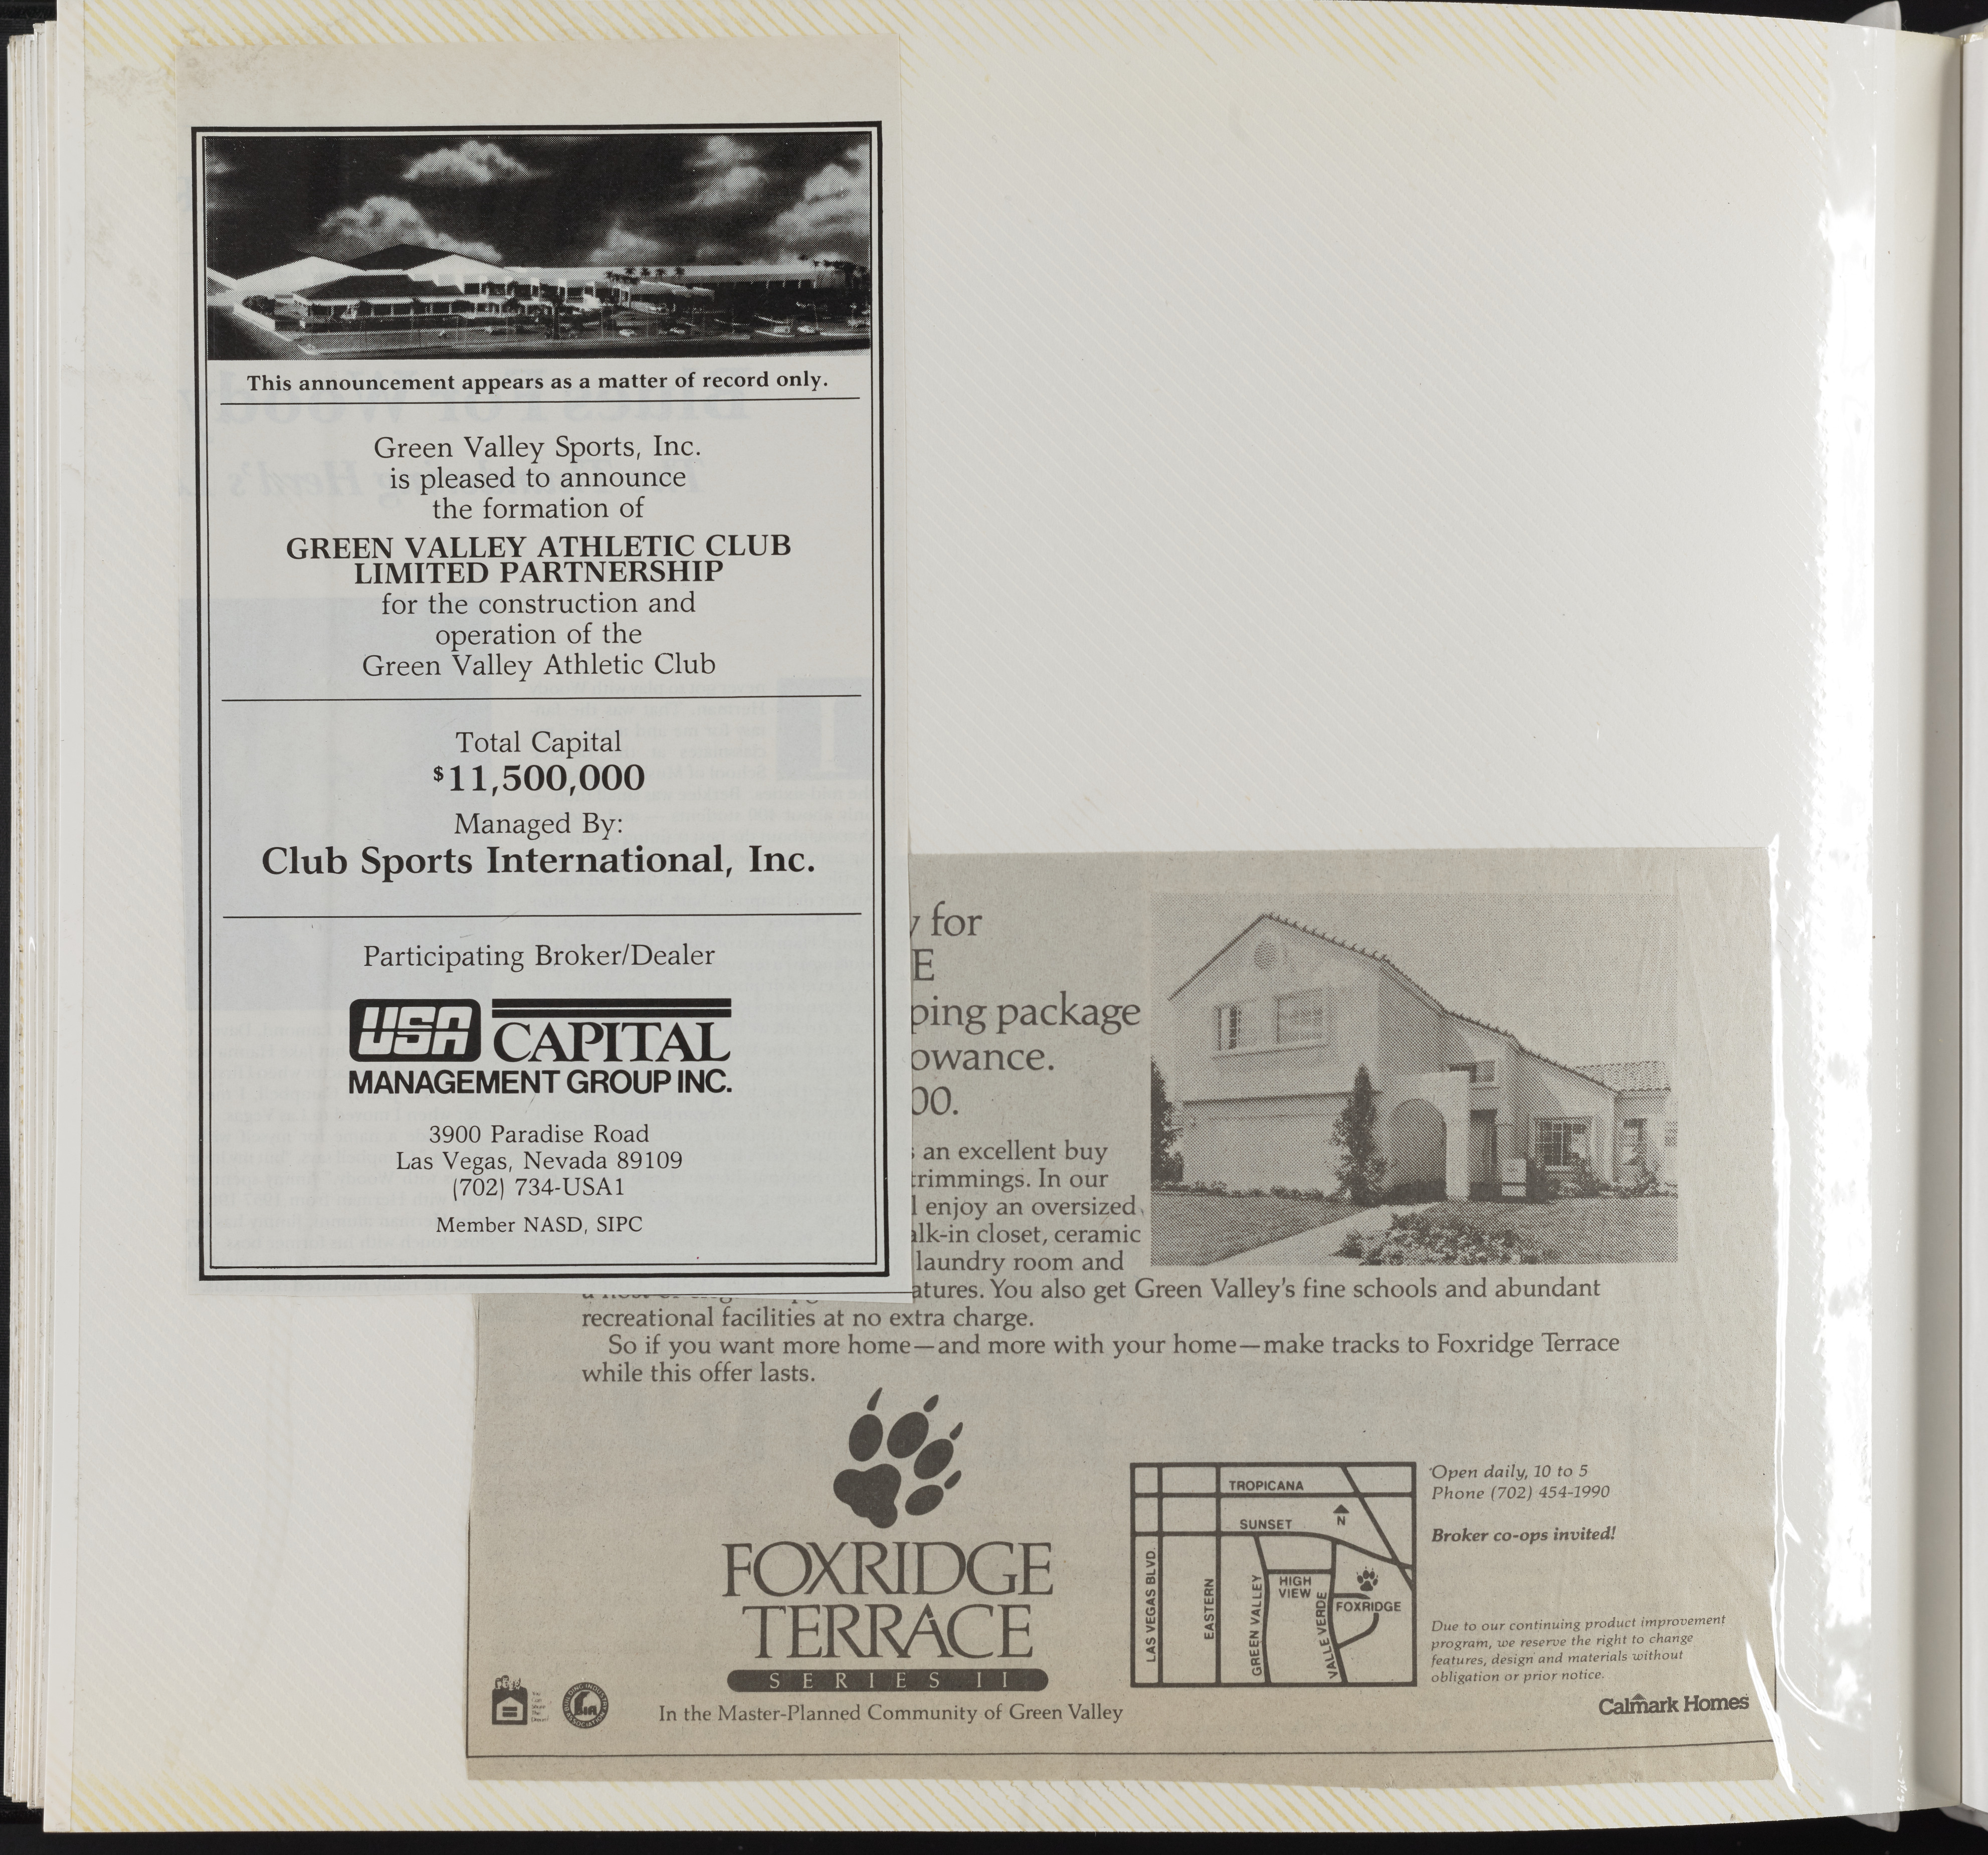 Clippings of advertisements for Green Valley